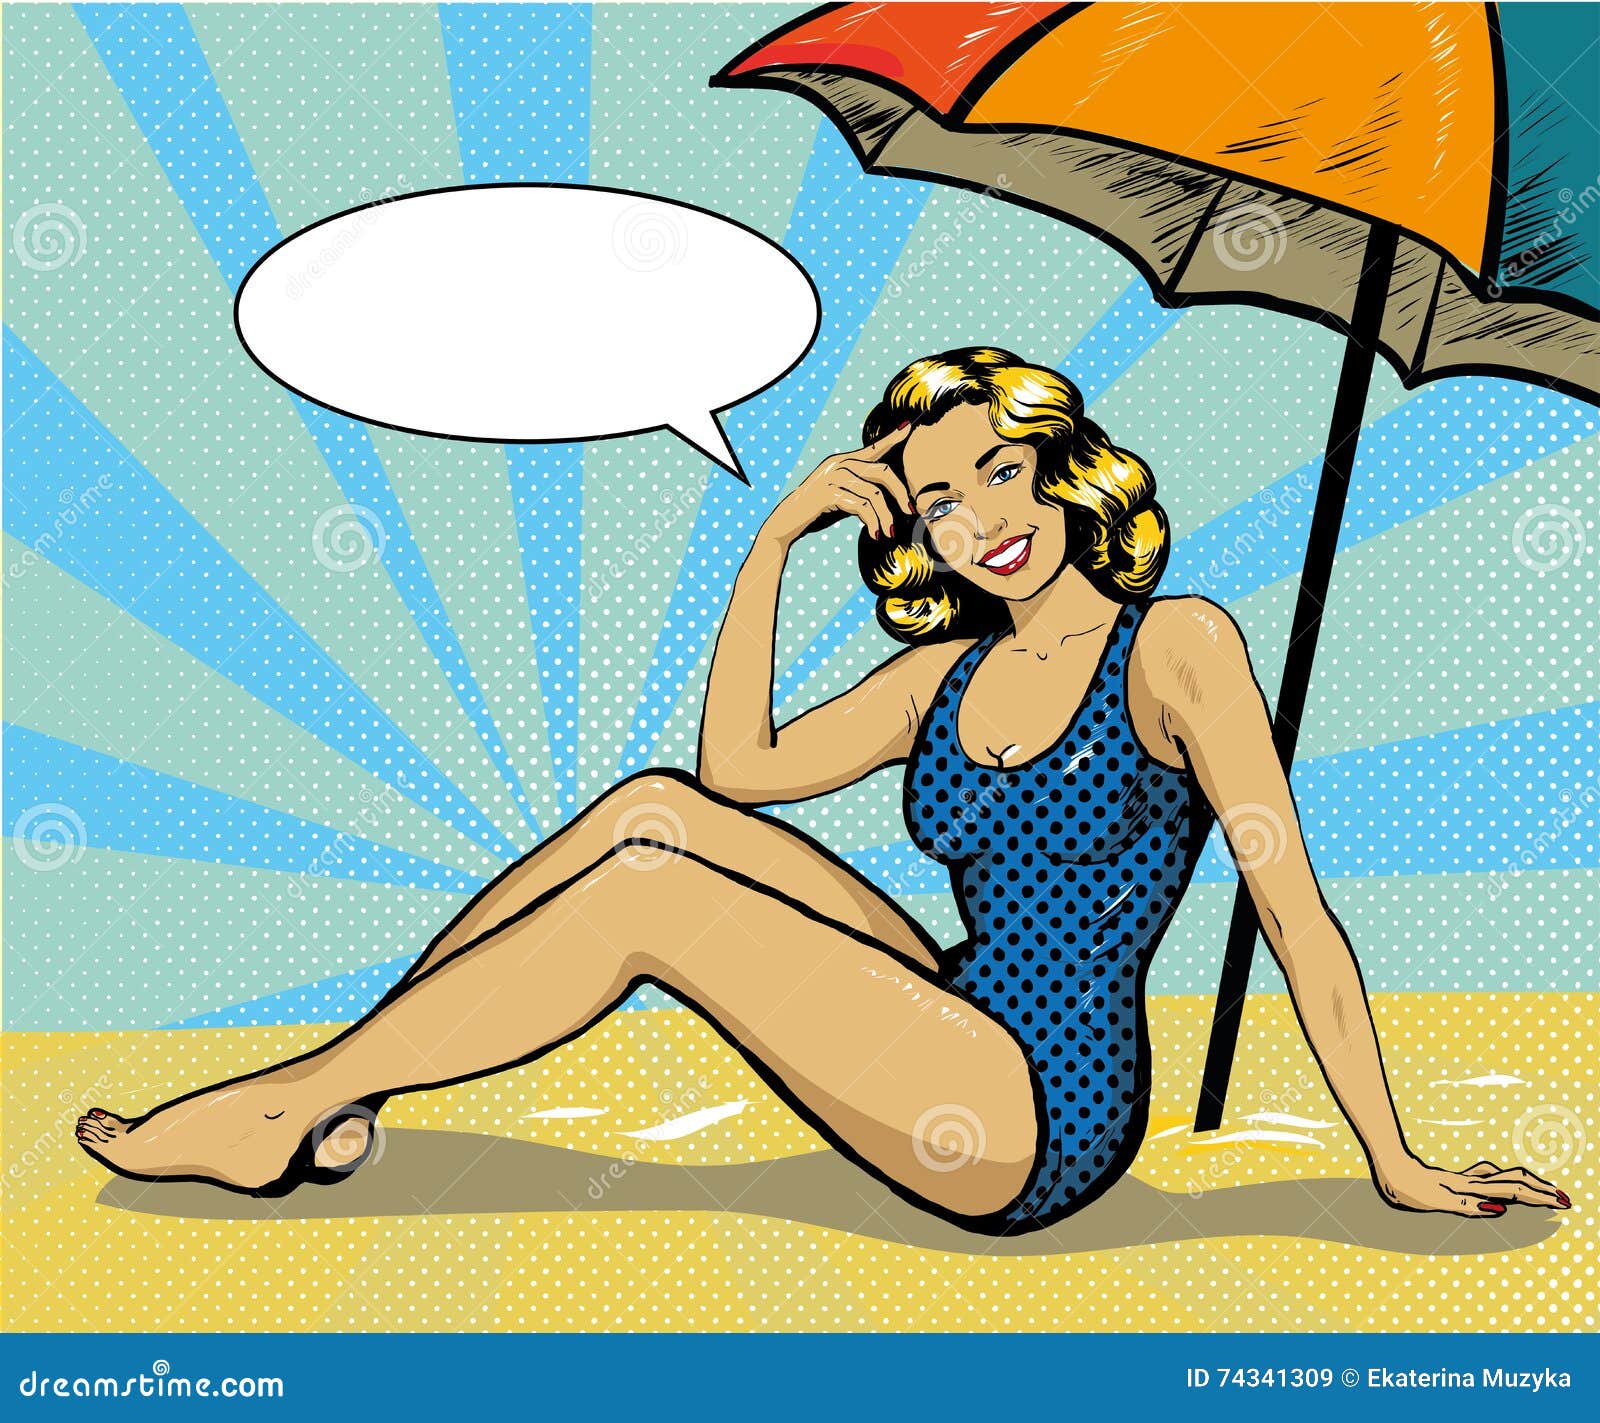 Woman in Swimsuit on a Tropical Beach. Summer Concept Vector Illustration  in Retro Comic Pop Art Style Stock Vector - Illustration of bubble,  sunbathing: 74341309